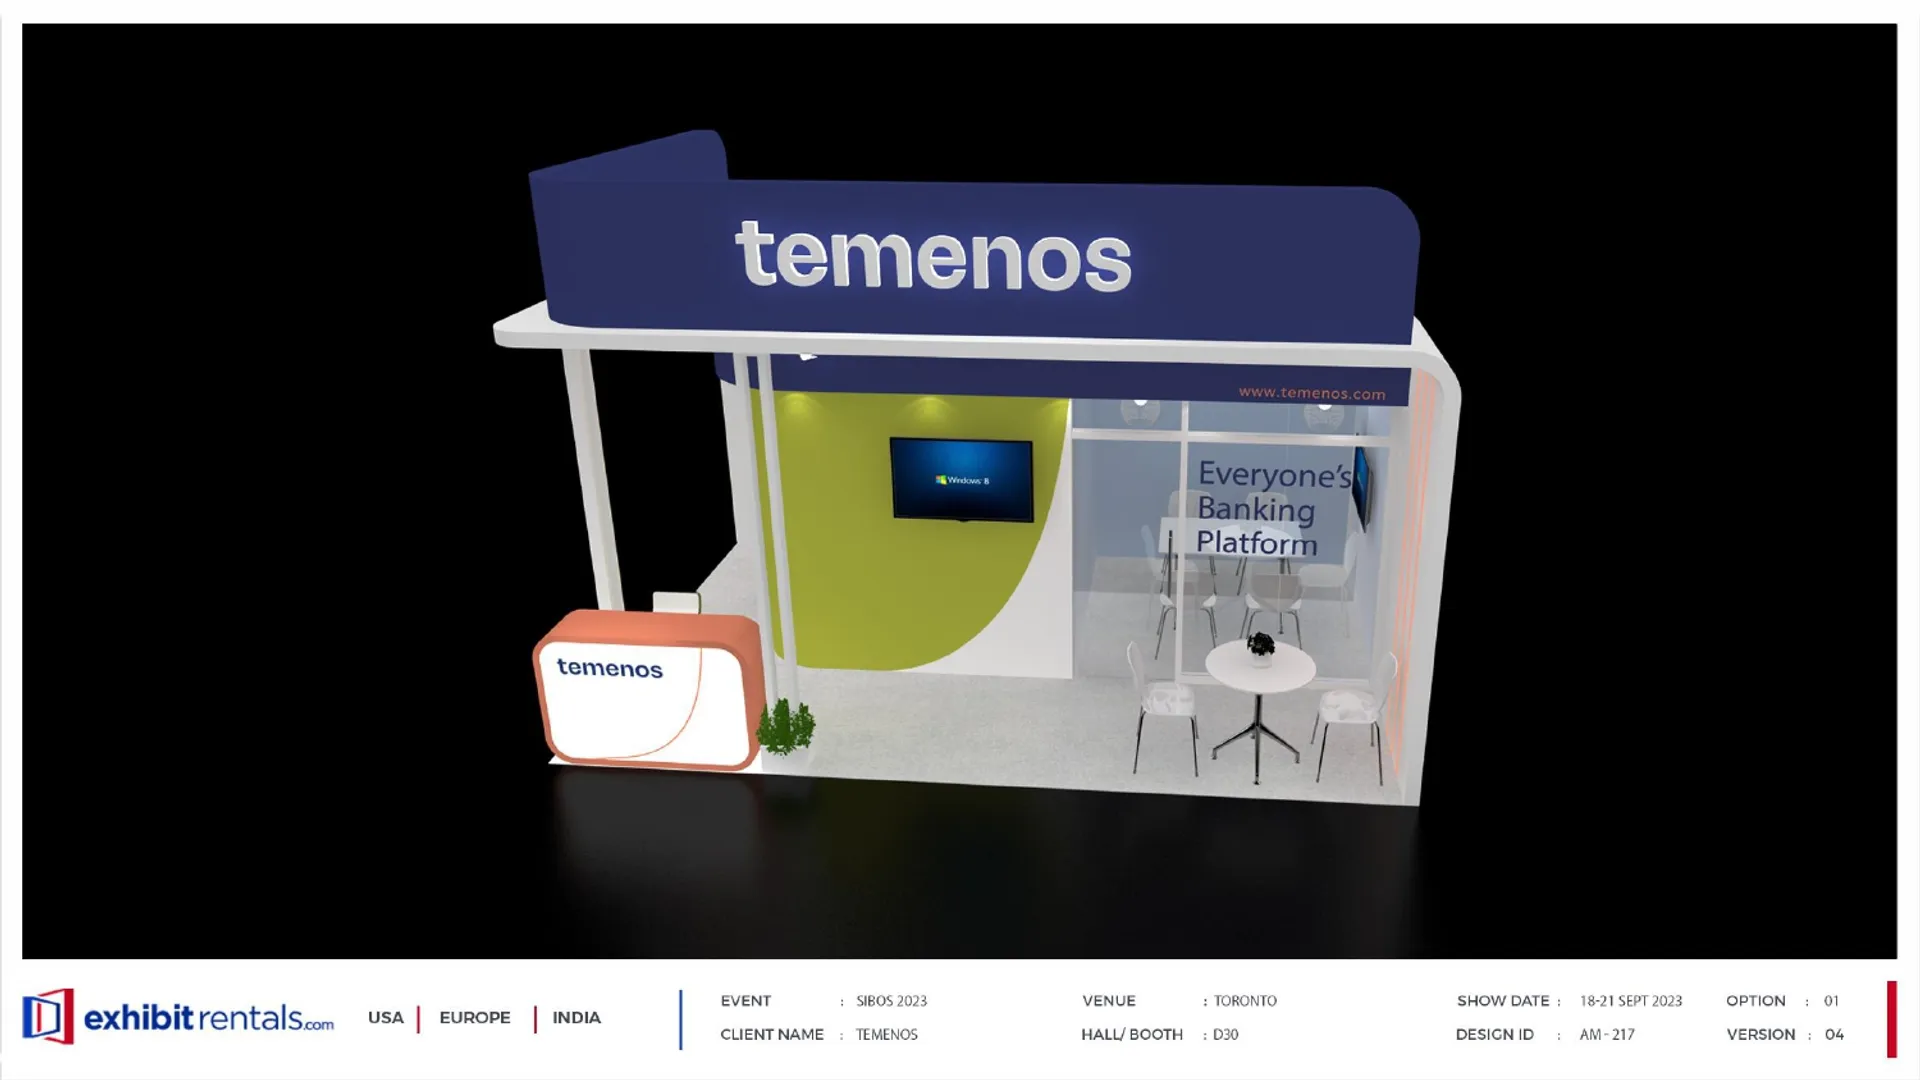 booth-design-projects/Exhibit-Rentals/2024-04-17-20x20-PENINSULA-Project-107/1.4 - Temenos - ER Design Presentation.pptx-21_page-0001-ds8559.jpg